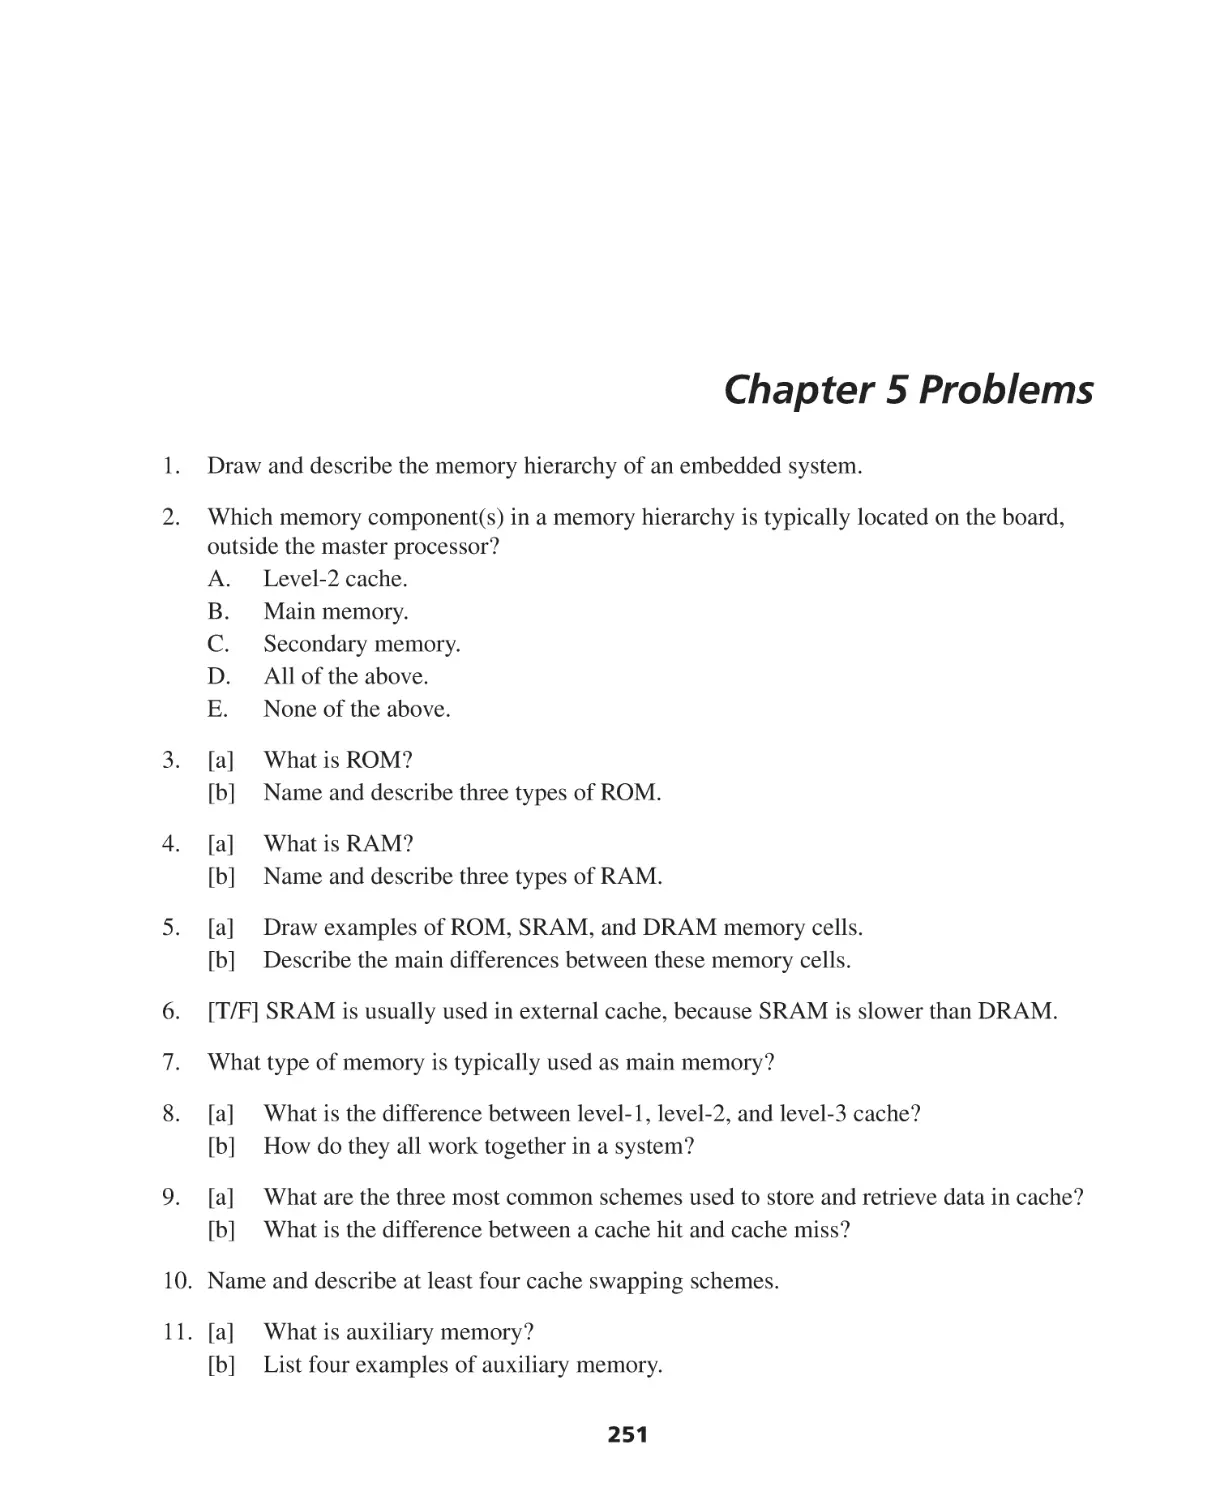 Chapter 5 Problems